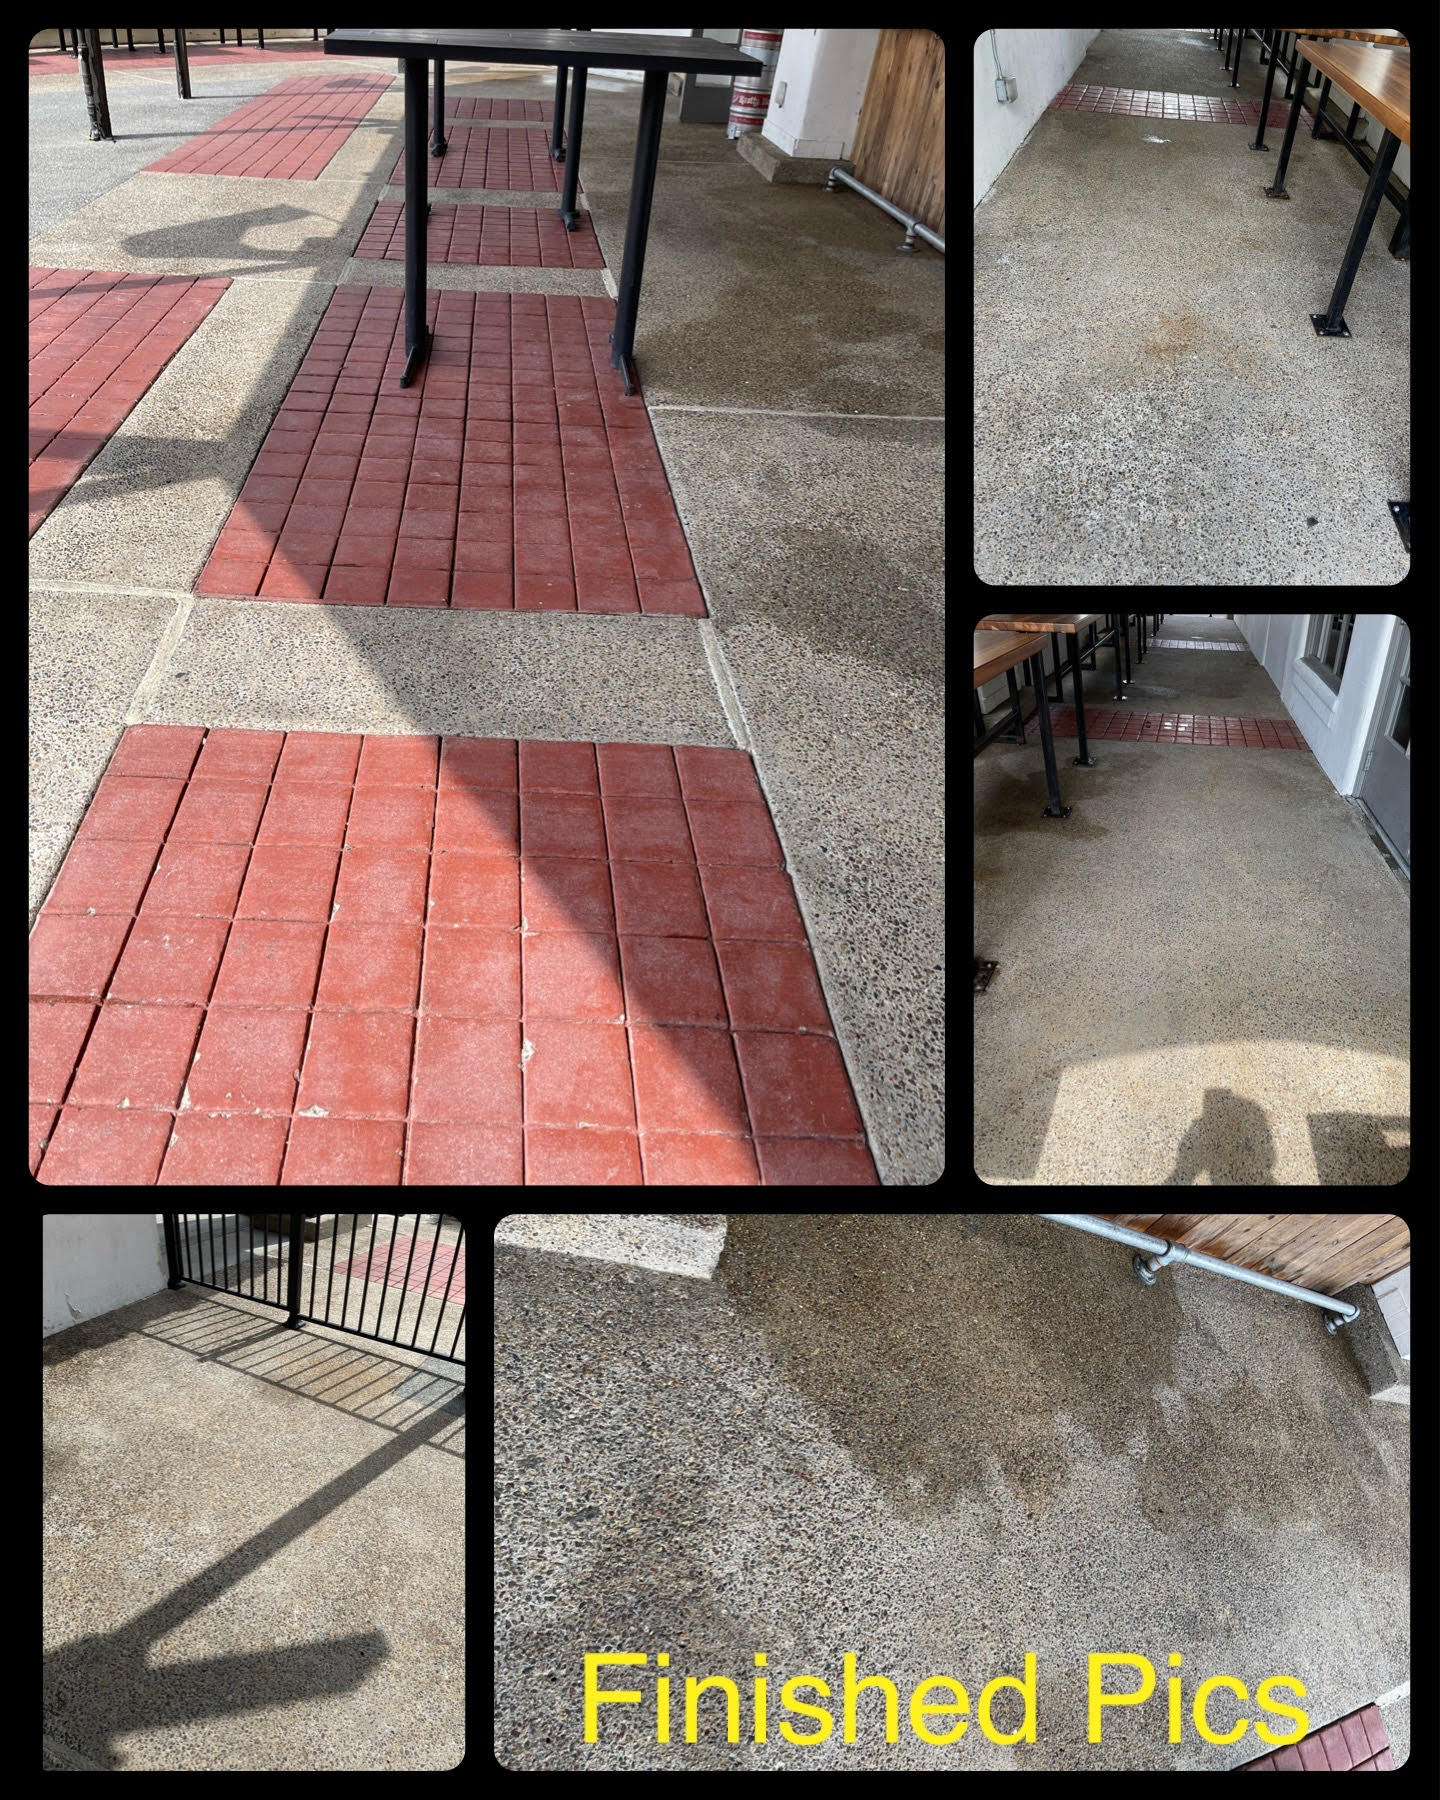 Restaurant Patio Cleaning in San Diego, CA